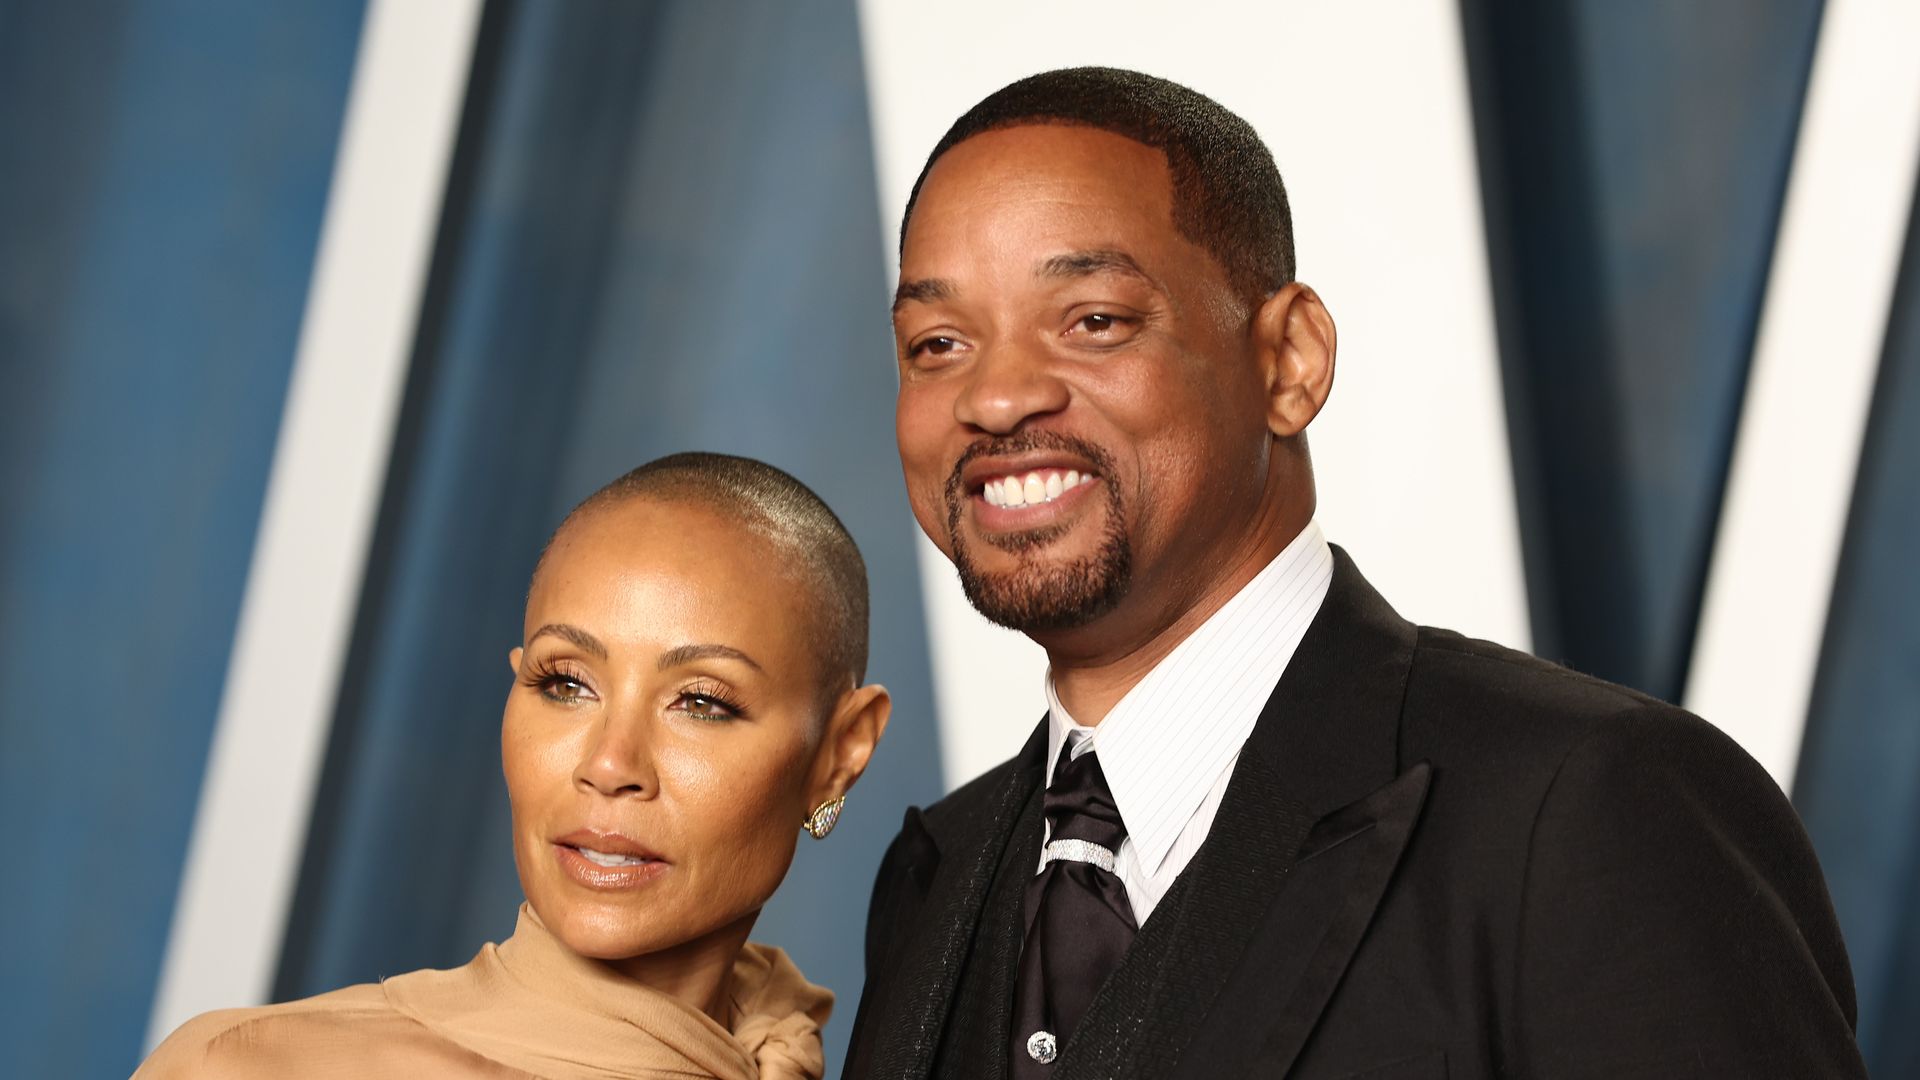 Jada Pinkett Smith and Will Smith attend the 2022 Vanity Fair Oscar Party Hosted By Radhika Jones at Wallis Annenberg Center for the Performing Arts on March 27, 2022 in Beverly Hills, California.